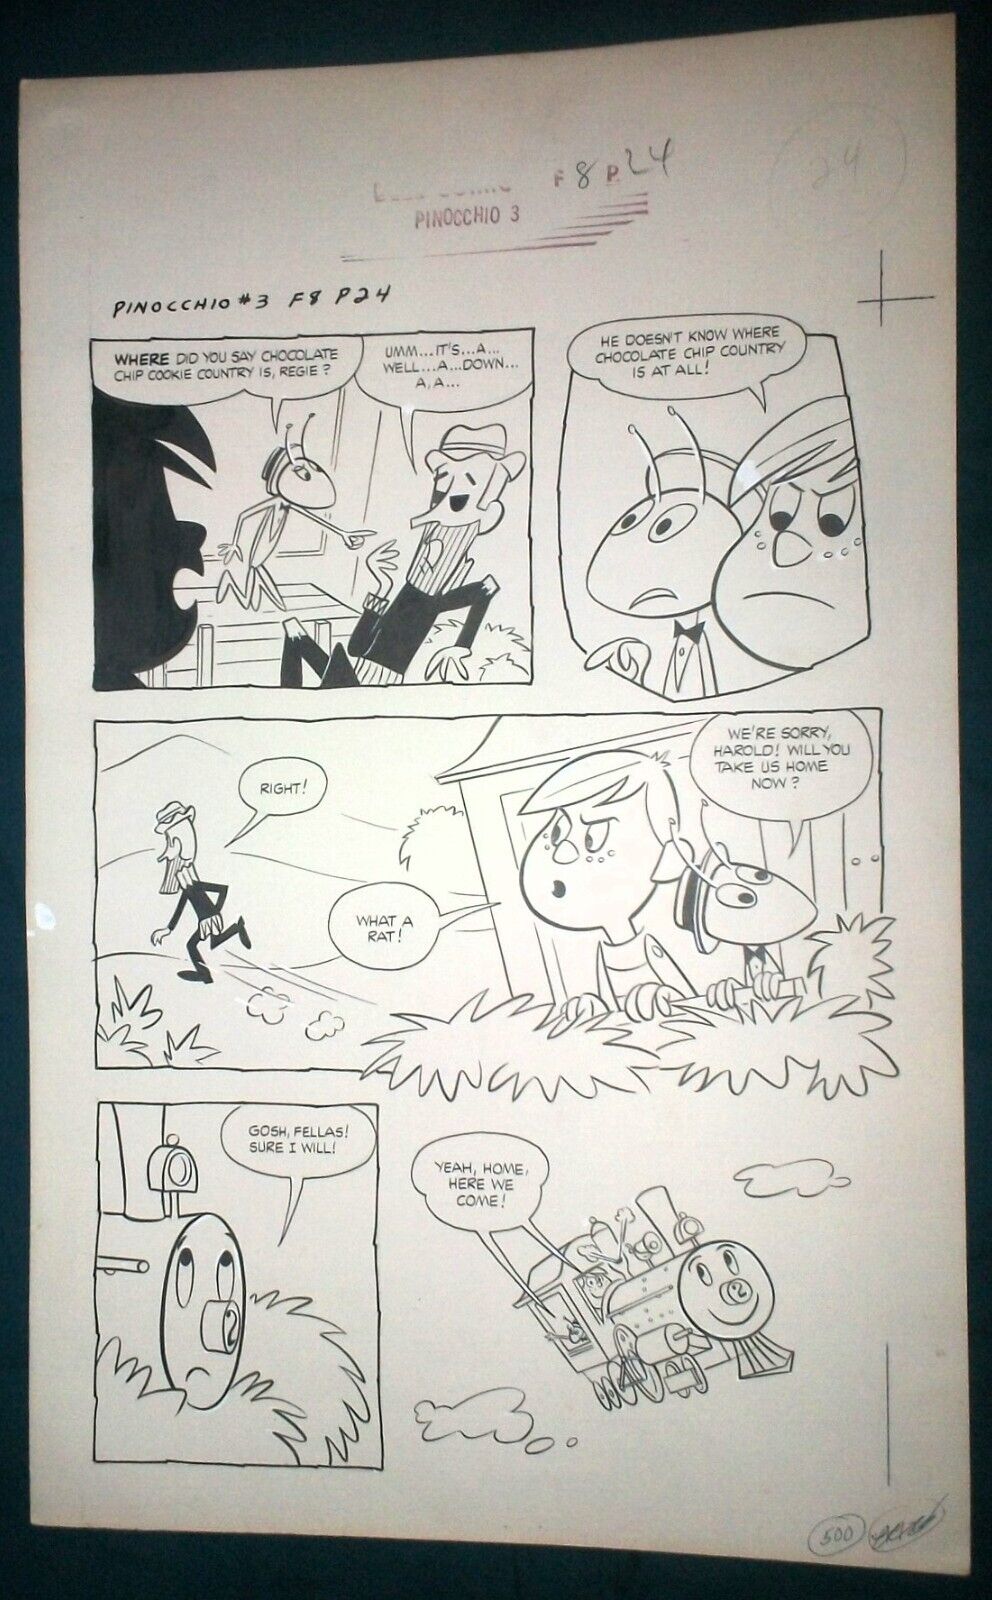 1963 DELL COMICS NEW ADVENTURES OF PINOCCHIO #3 ORIGINAL ART PAGE DRAWING SKETCH